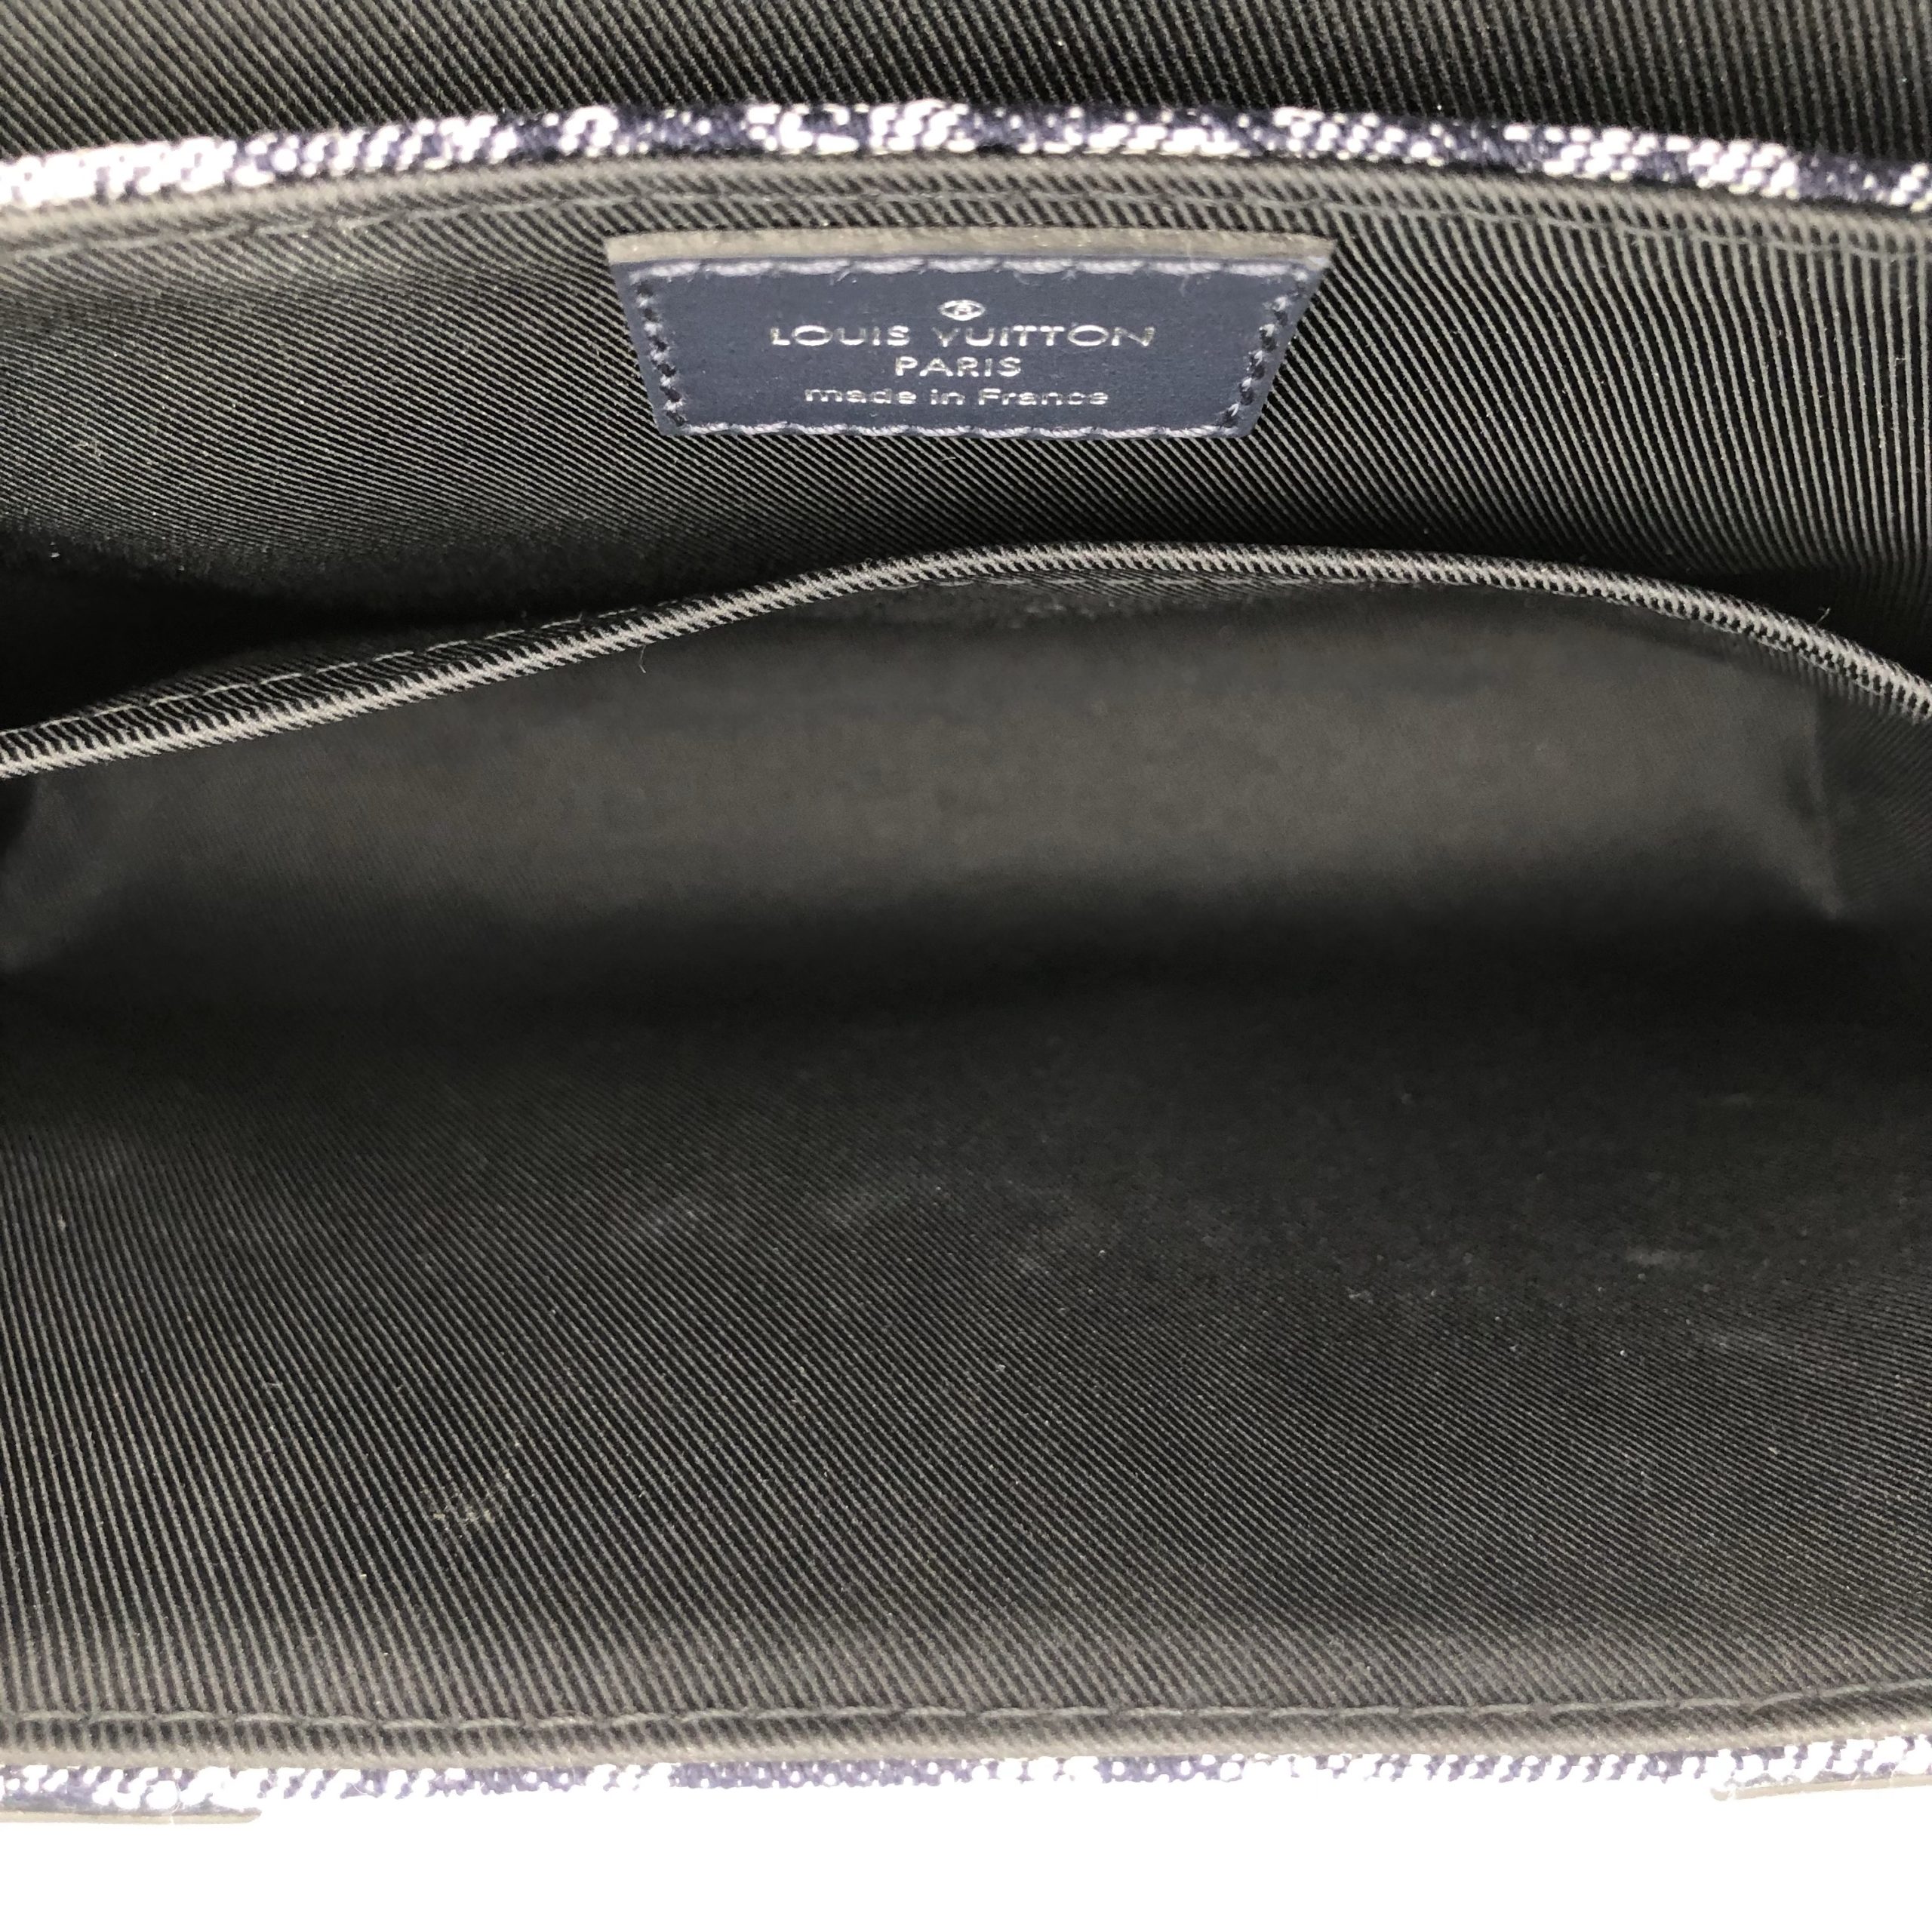 Louis Vuitton trunk messenger bag in blue canvas with monogram tapestry -  DOWNTOWN UPTOWN Genève